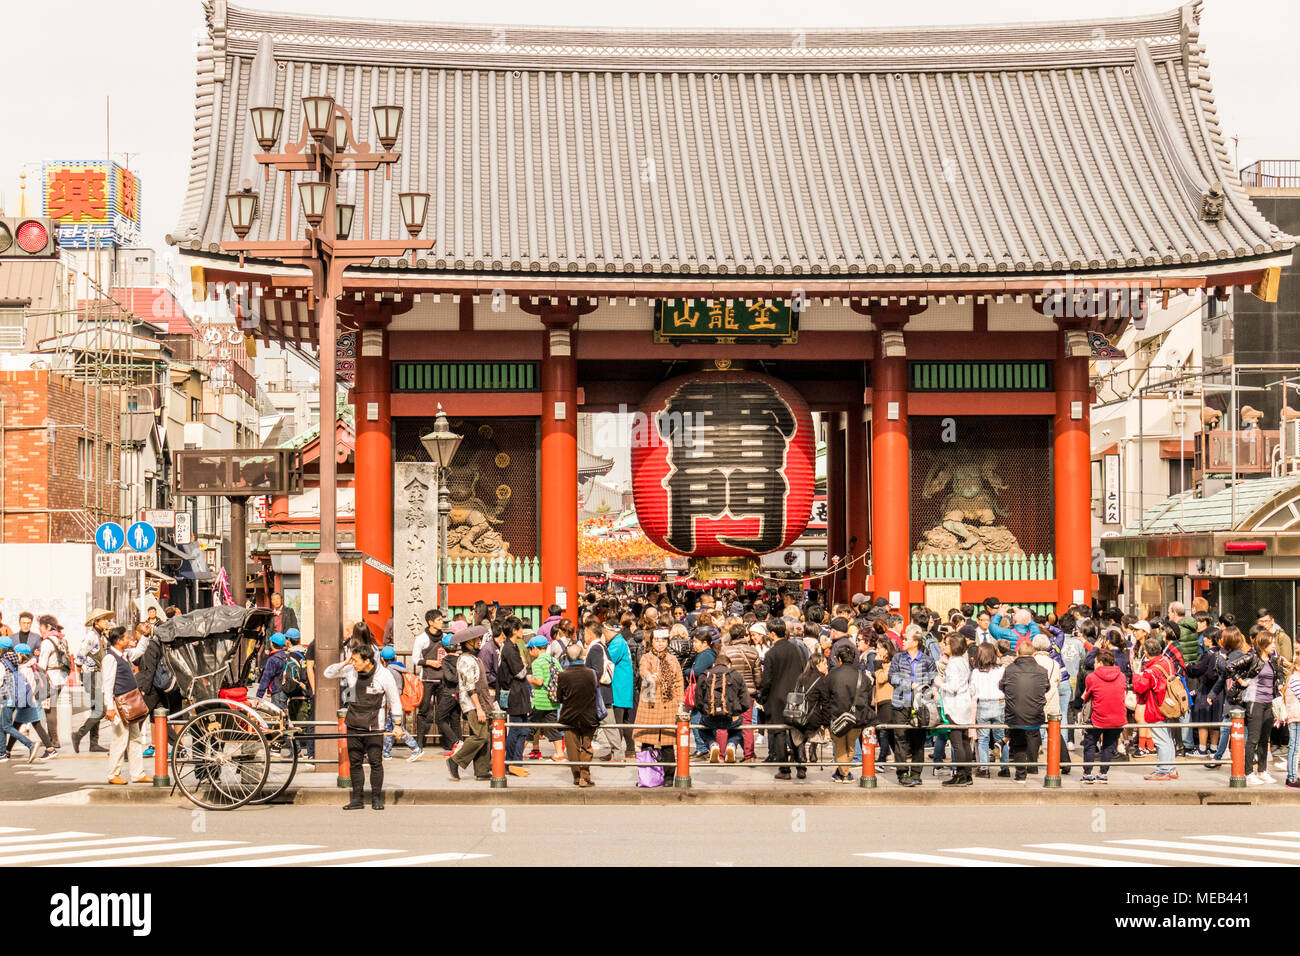 People tourist and visitors enjoying shopping exploring and walking around the area around Asakusa Kannon Temple a Buddhist temple in Tokyo Japan. Stock Photo